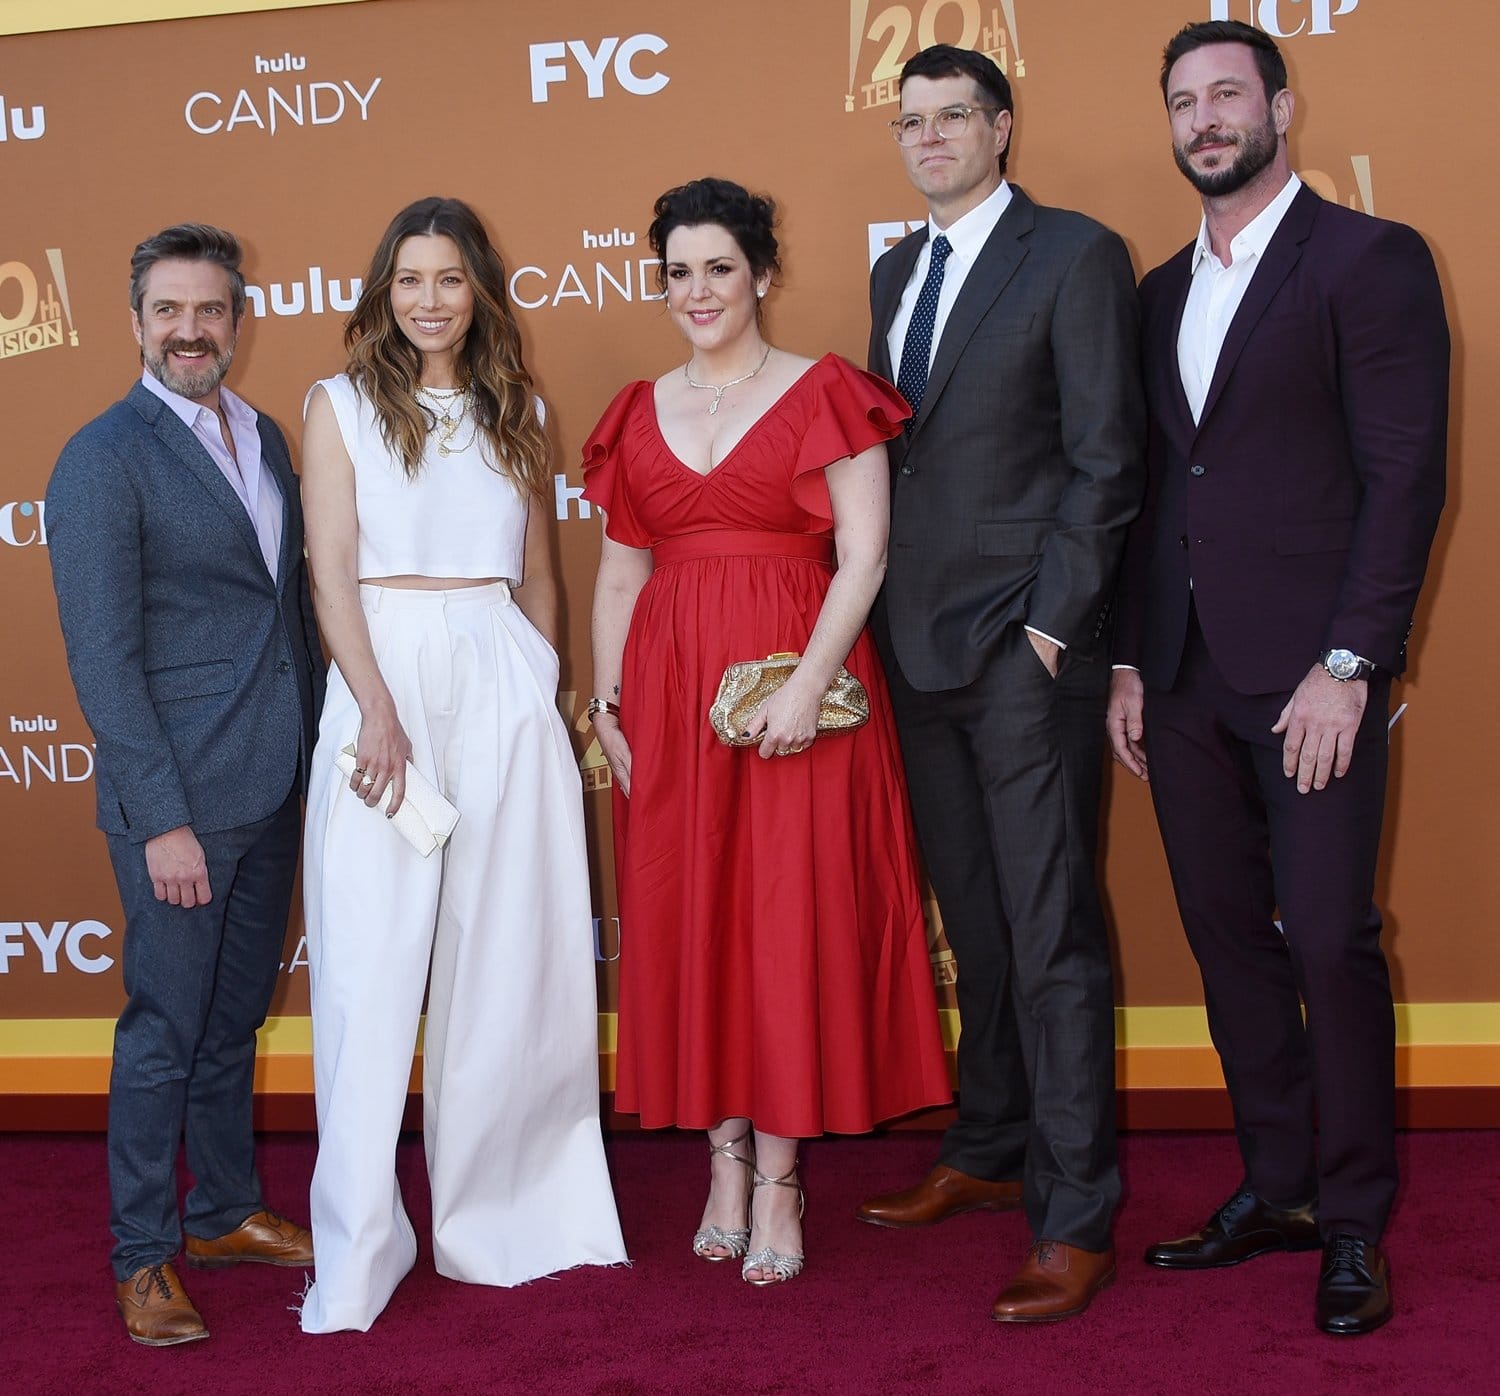 Candy cast members Timothy Simons, Jessica Biel, Melanie Lynskey, Raúl Esparza, and Pablo Schreiber at the premiere of their Hulu crime drama streaming television miniseries